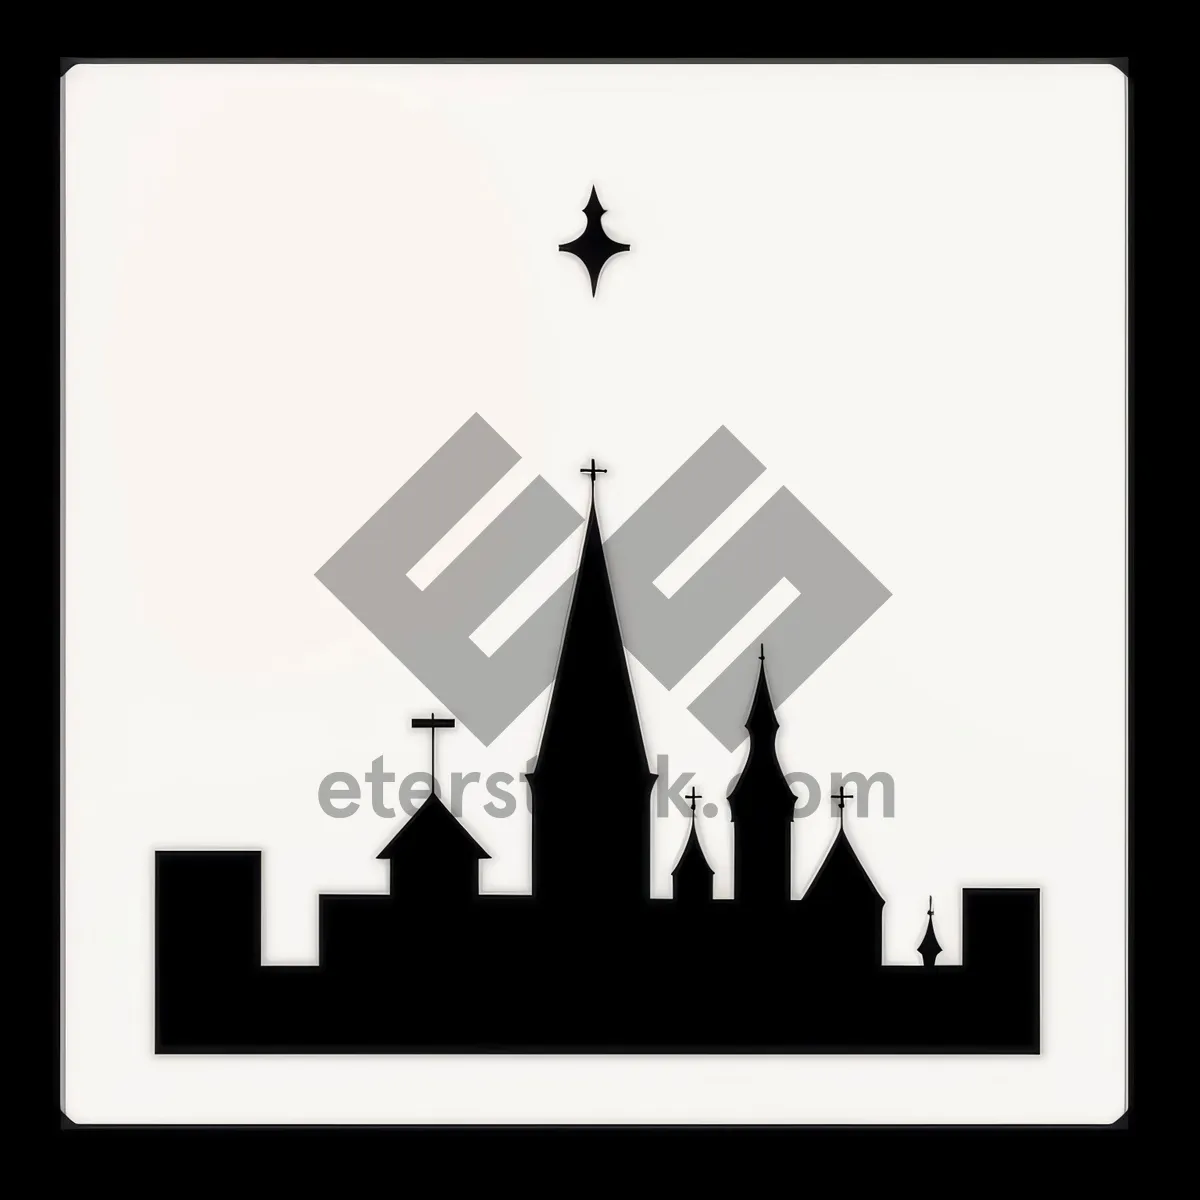 Picture of Eternal Watch: Fin, Cemetery Silhouette, Tower Symbol.